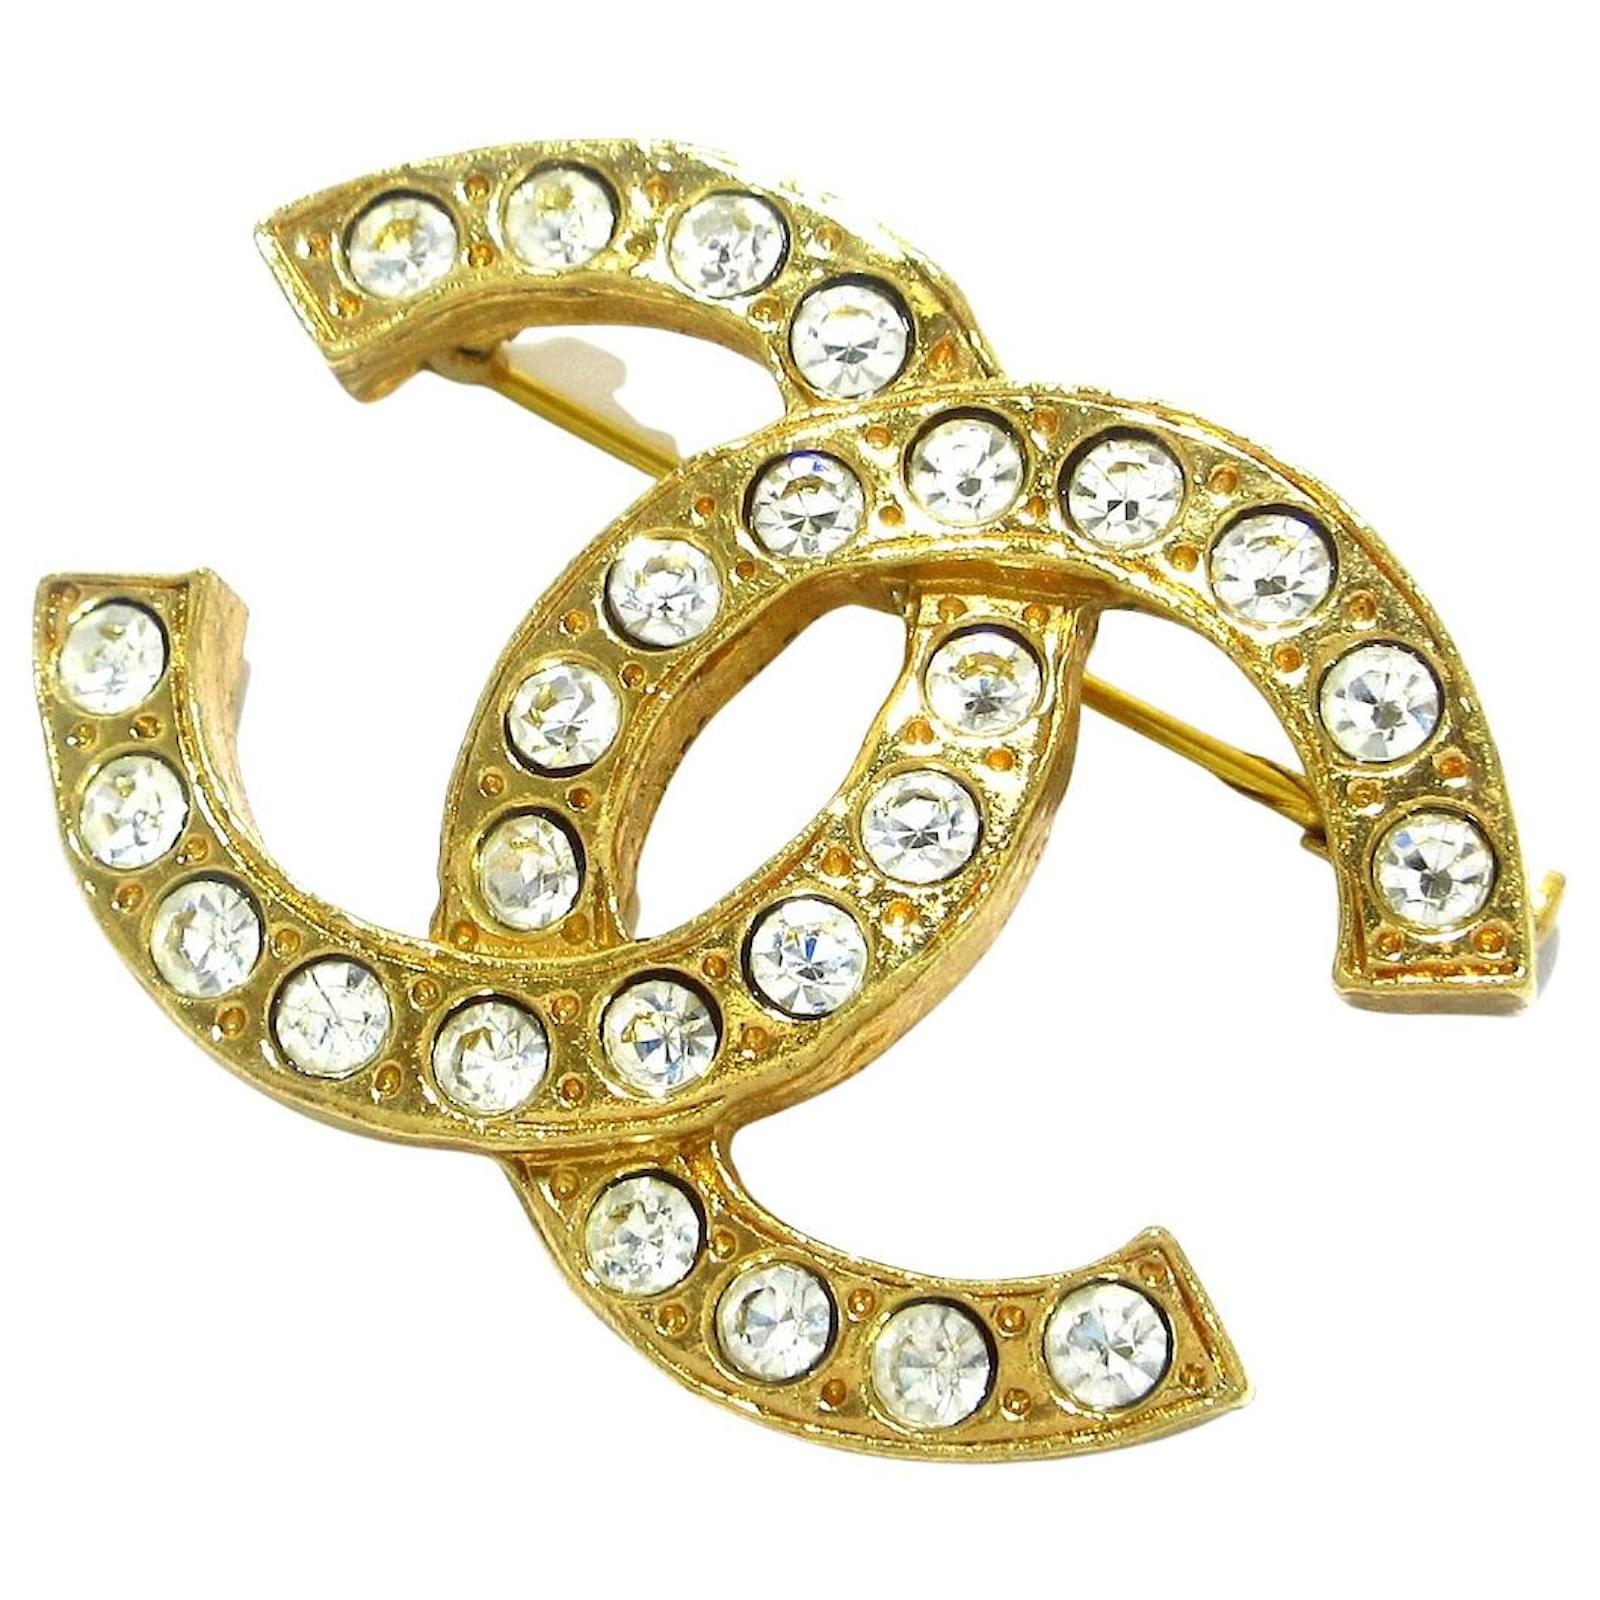 Timeless and Versatile: The Chanel Brooch